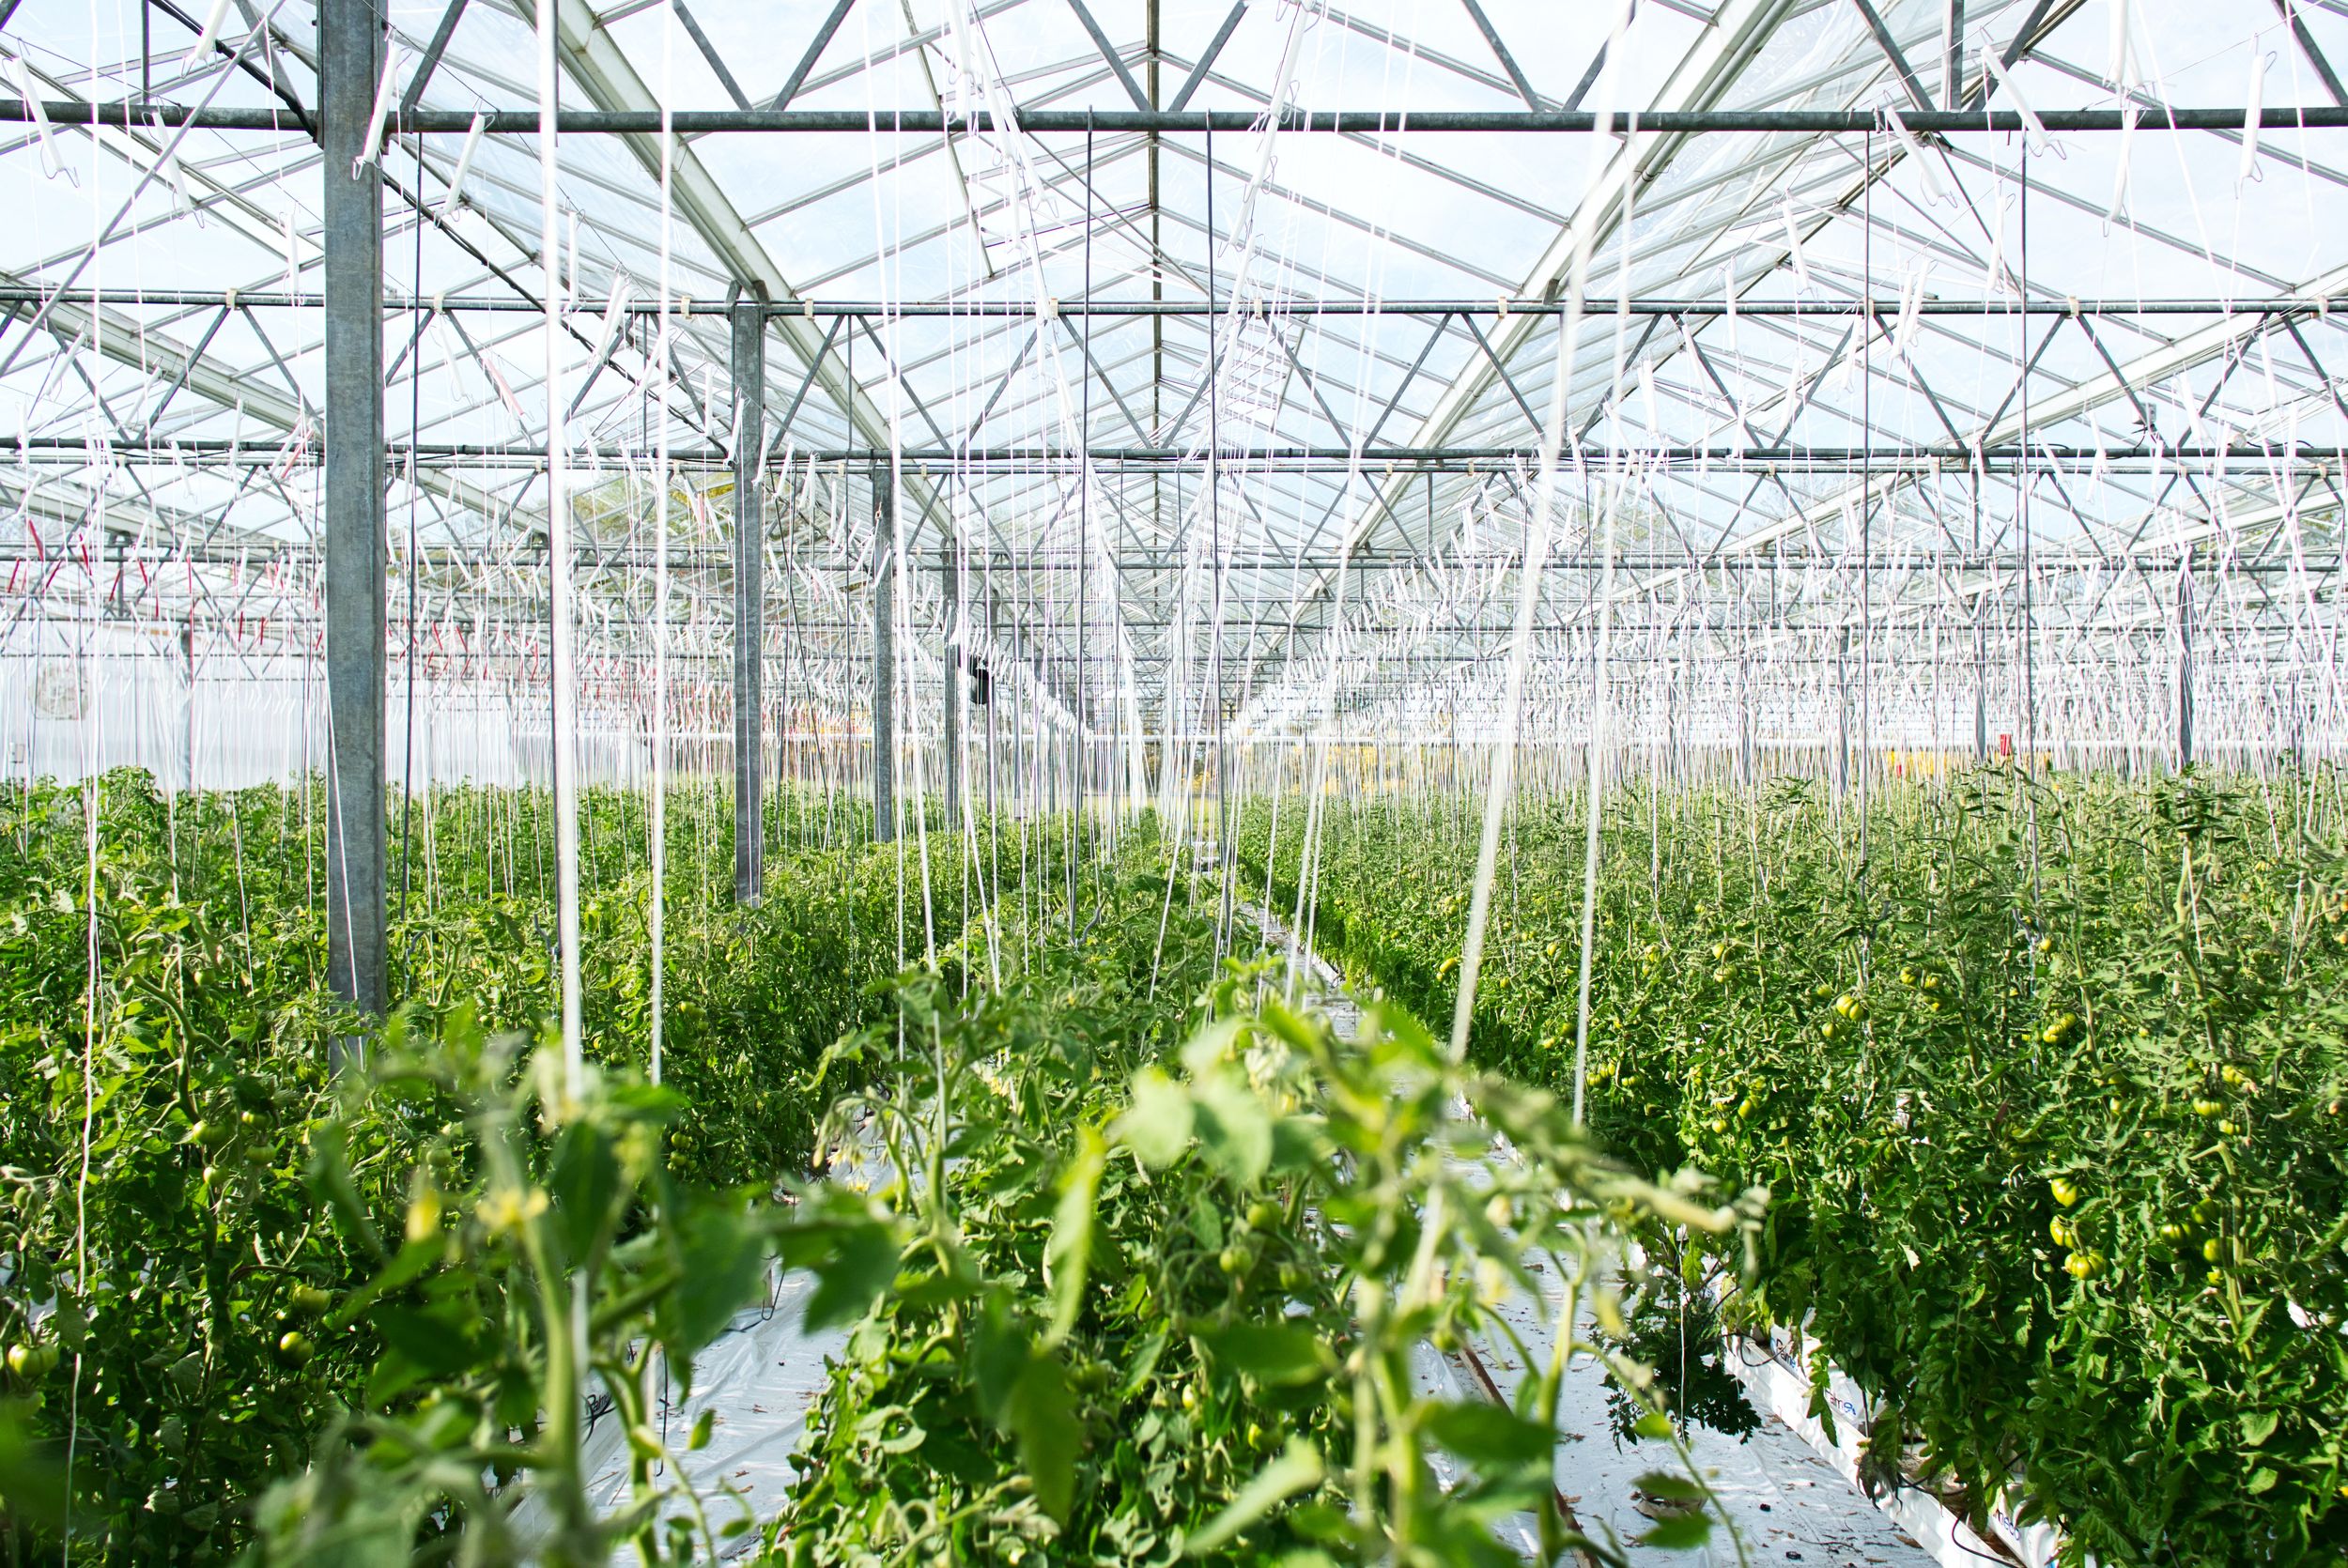 View of long greenhouse with plants